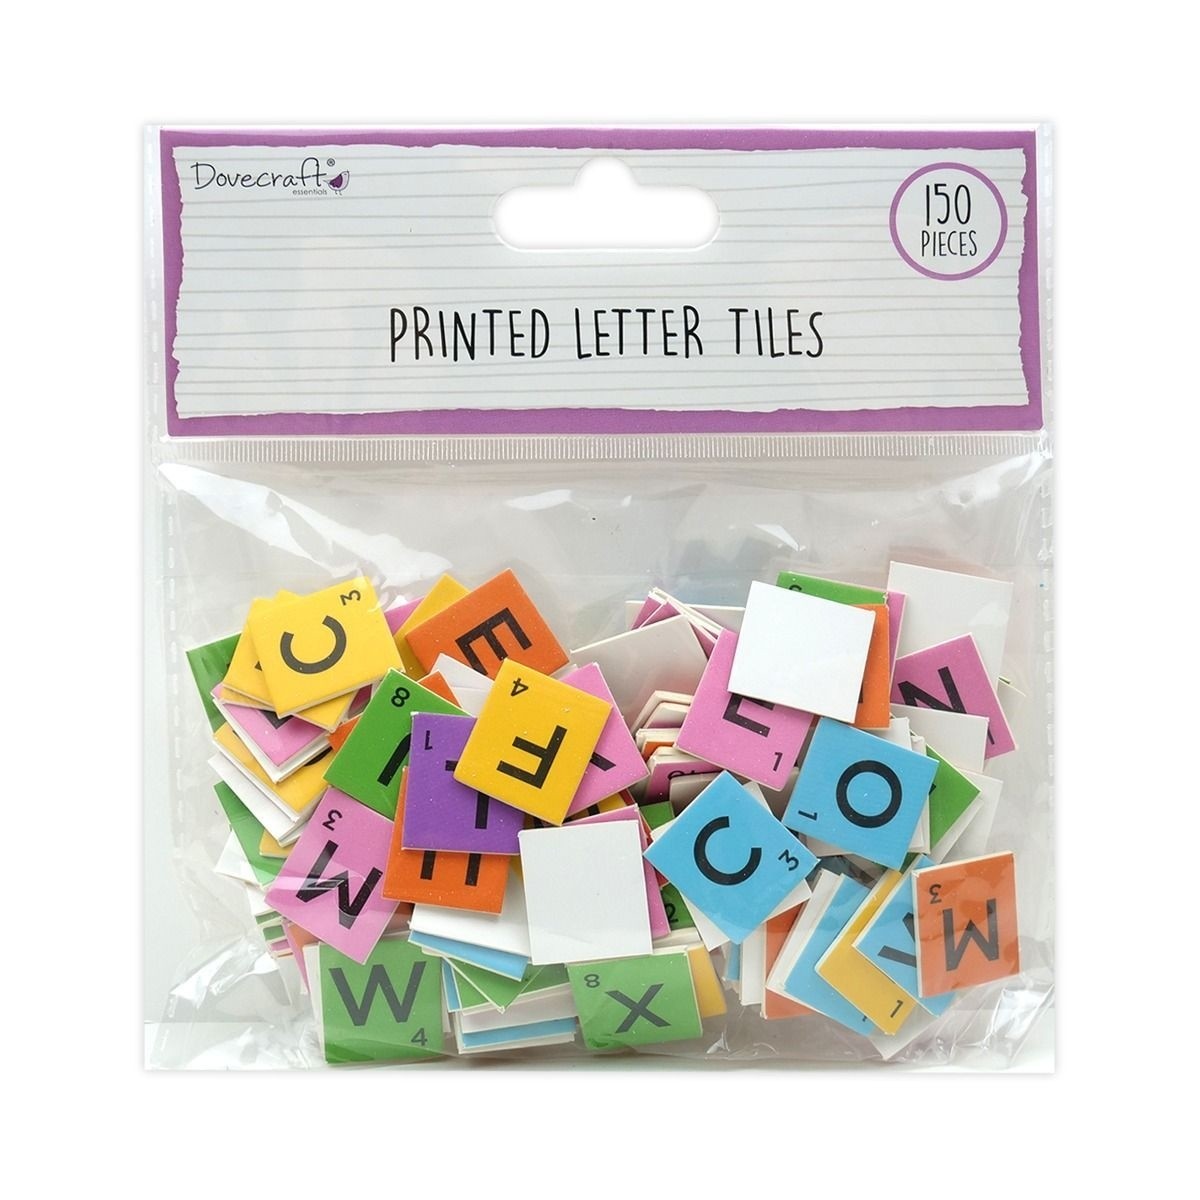 Dovecraft Printed Letter Tiles Brights (150pcs) (DCBS262)